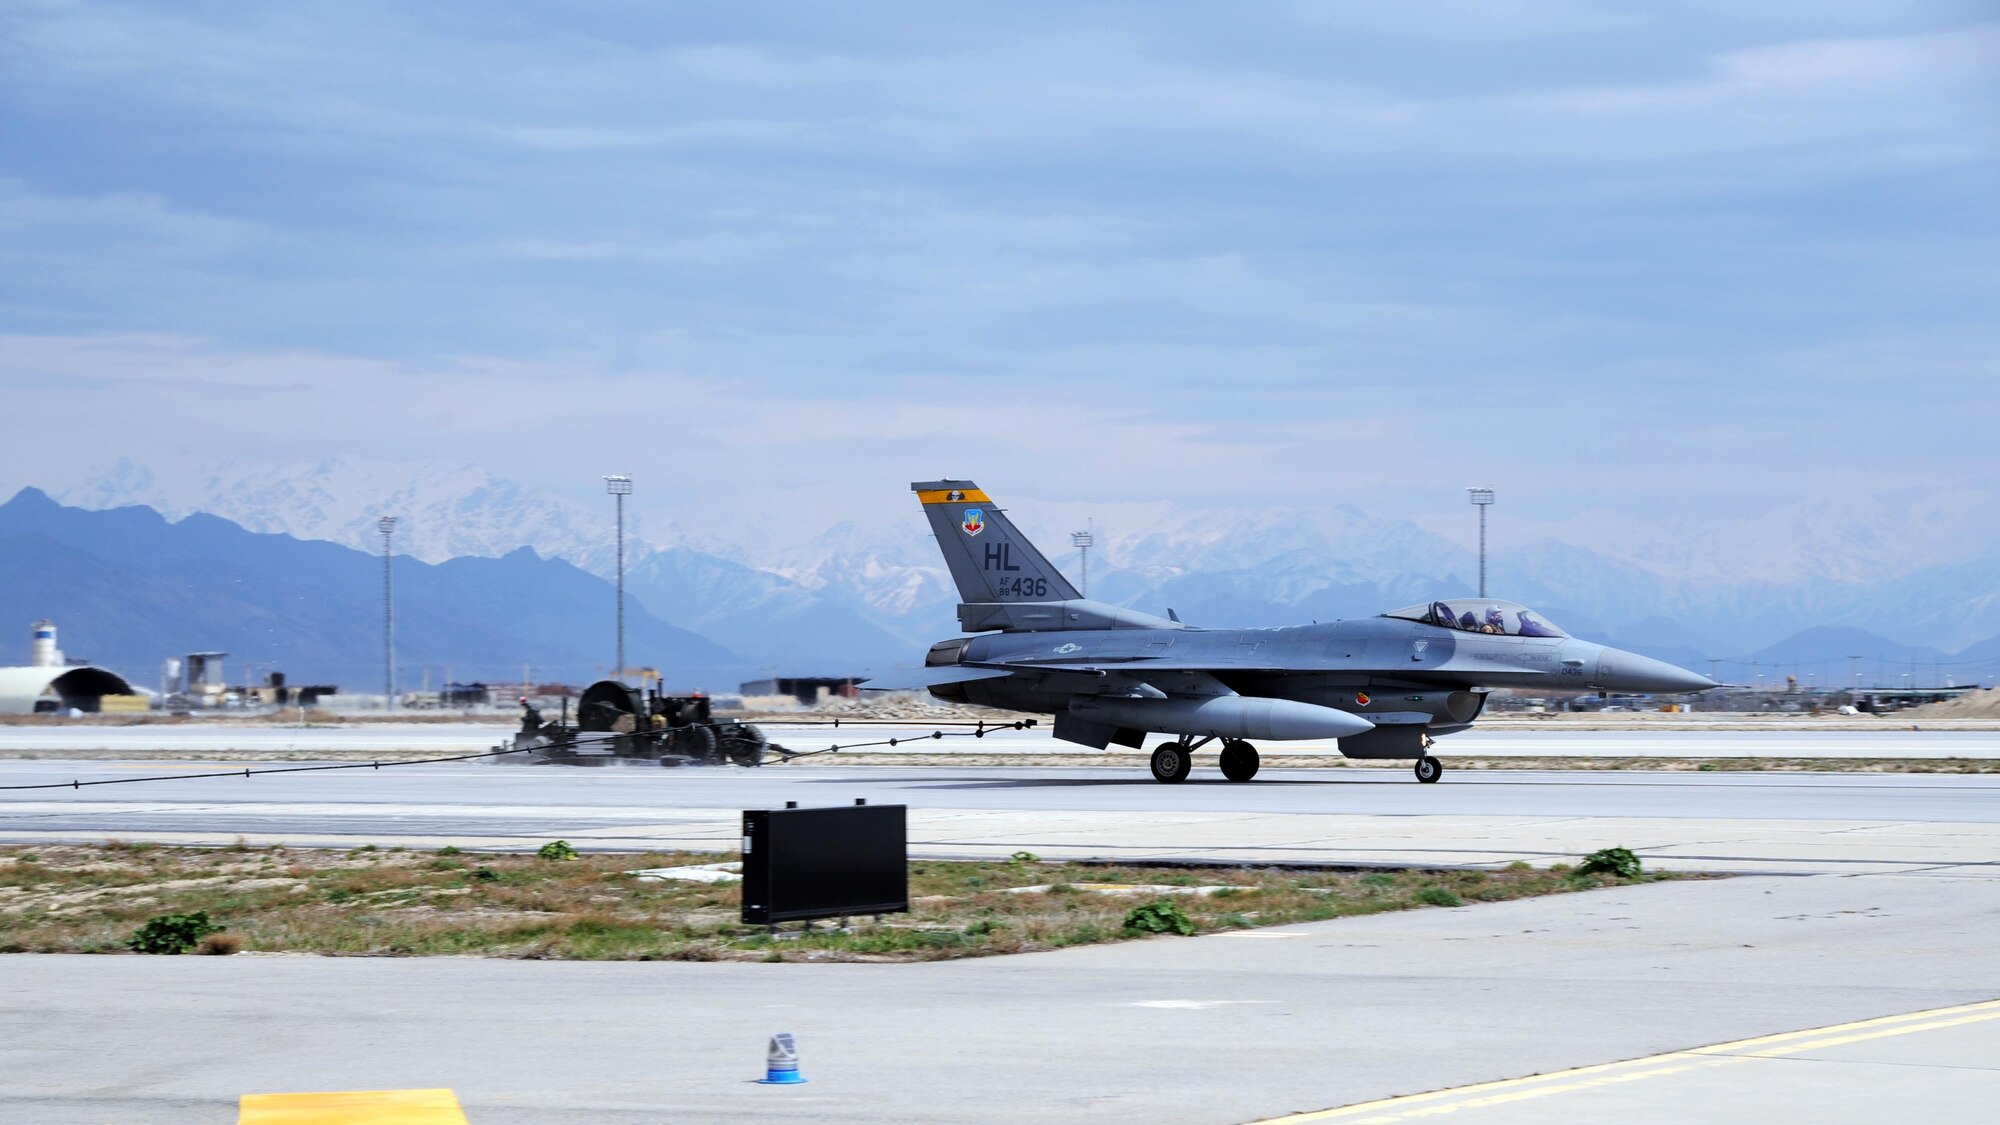 An F-16 Fighting Falcon is caught by the Mobile Aircraft Arresting System during a test of its operational functionality March 20, 2015 at Bagram Airfield, Afghanistan. The MAAS was from a separate taxiway as part of the construction of an alternate runway at Bagram. (U.S. Air Force photo by Master Sgt. James Law/released)